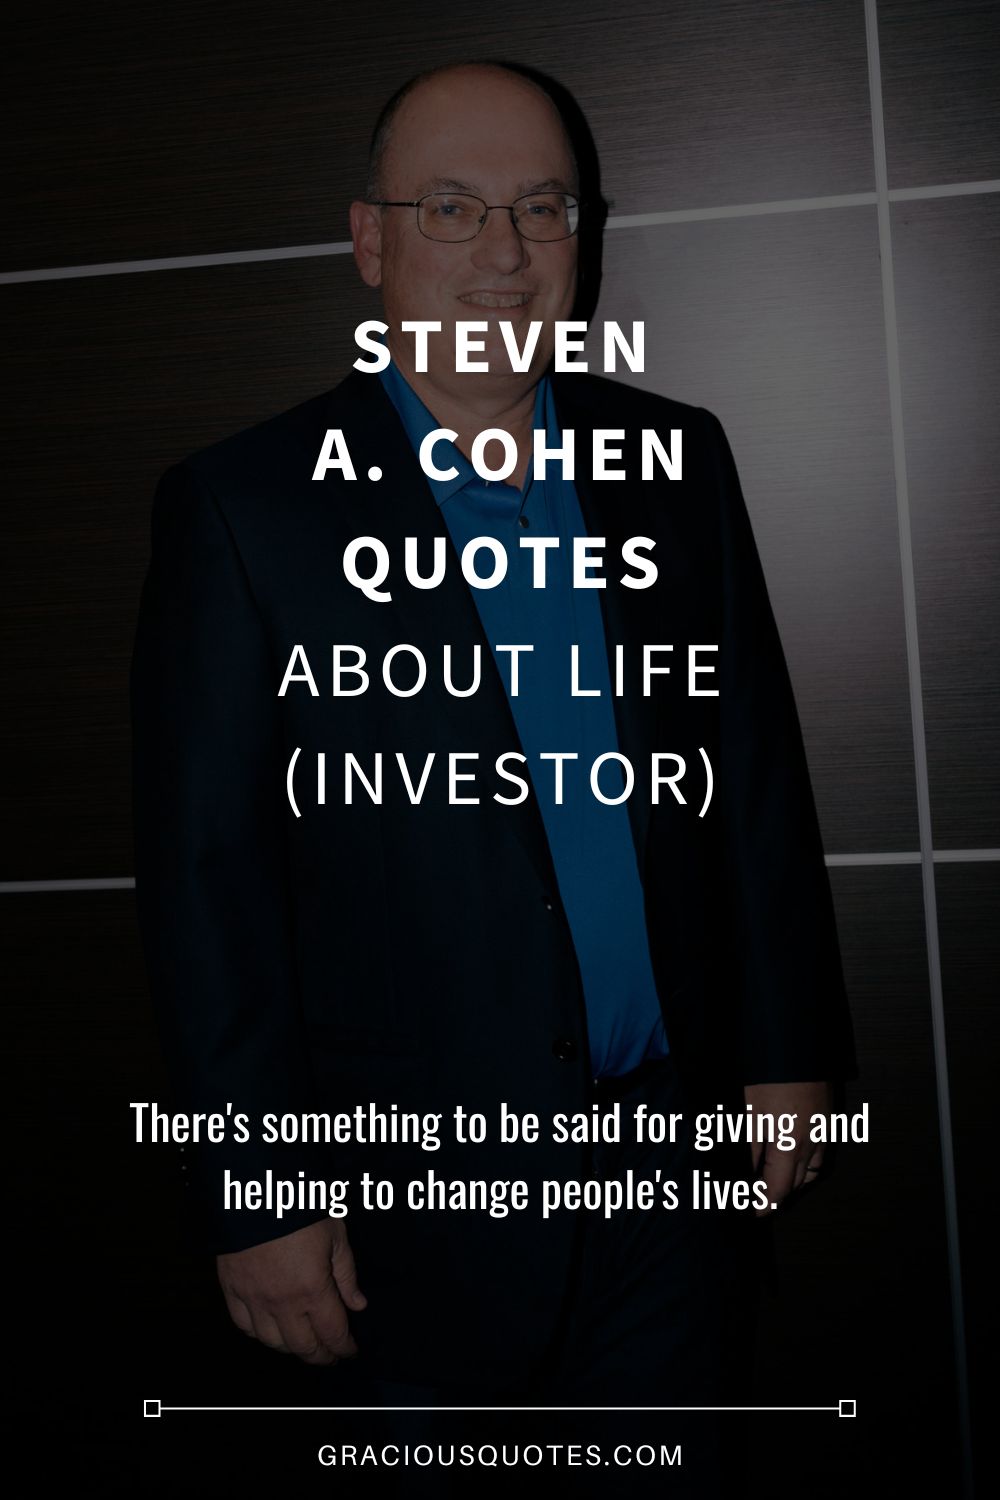 Steven A. Cohen Quotes About Life (INVESTOR) - Gracious Quotes